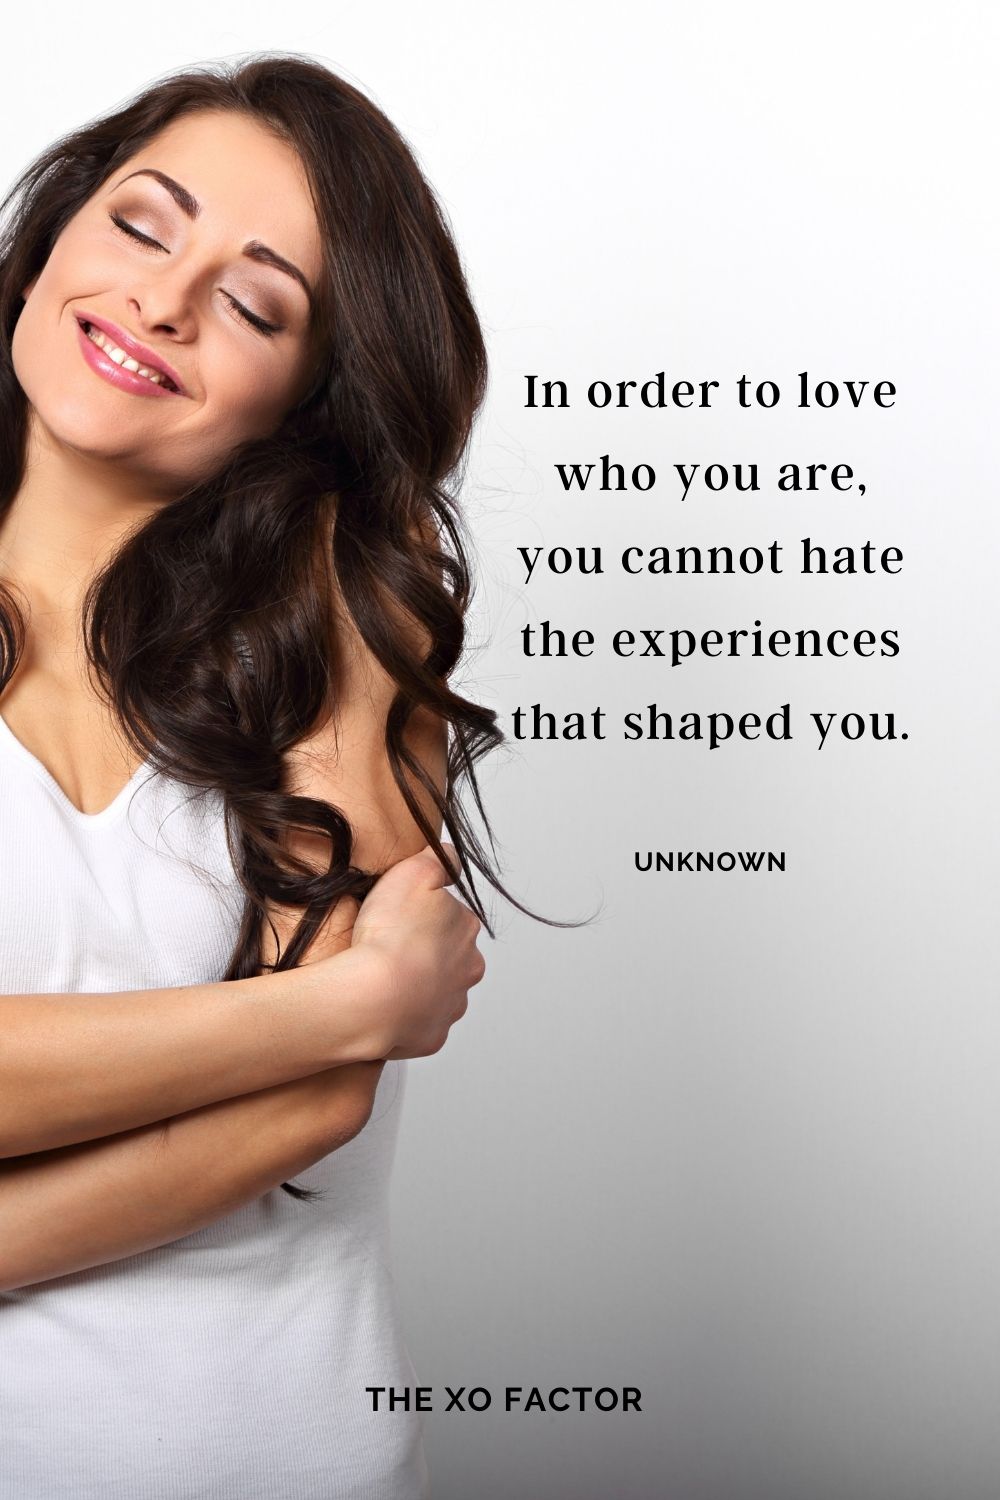 In order to love who you are, you cannot hate the experiences that shaped you. Unknown